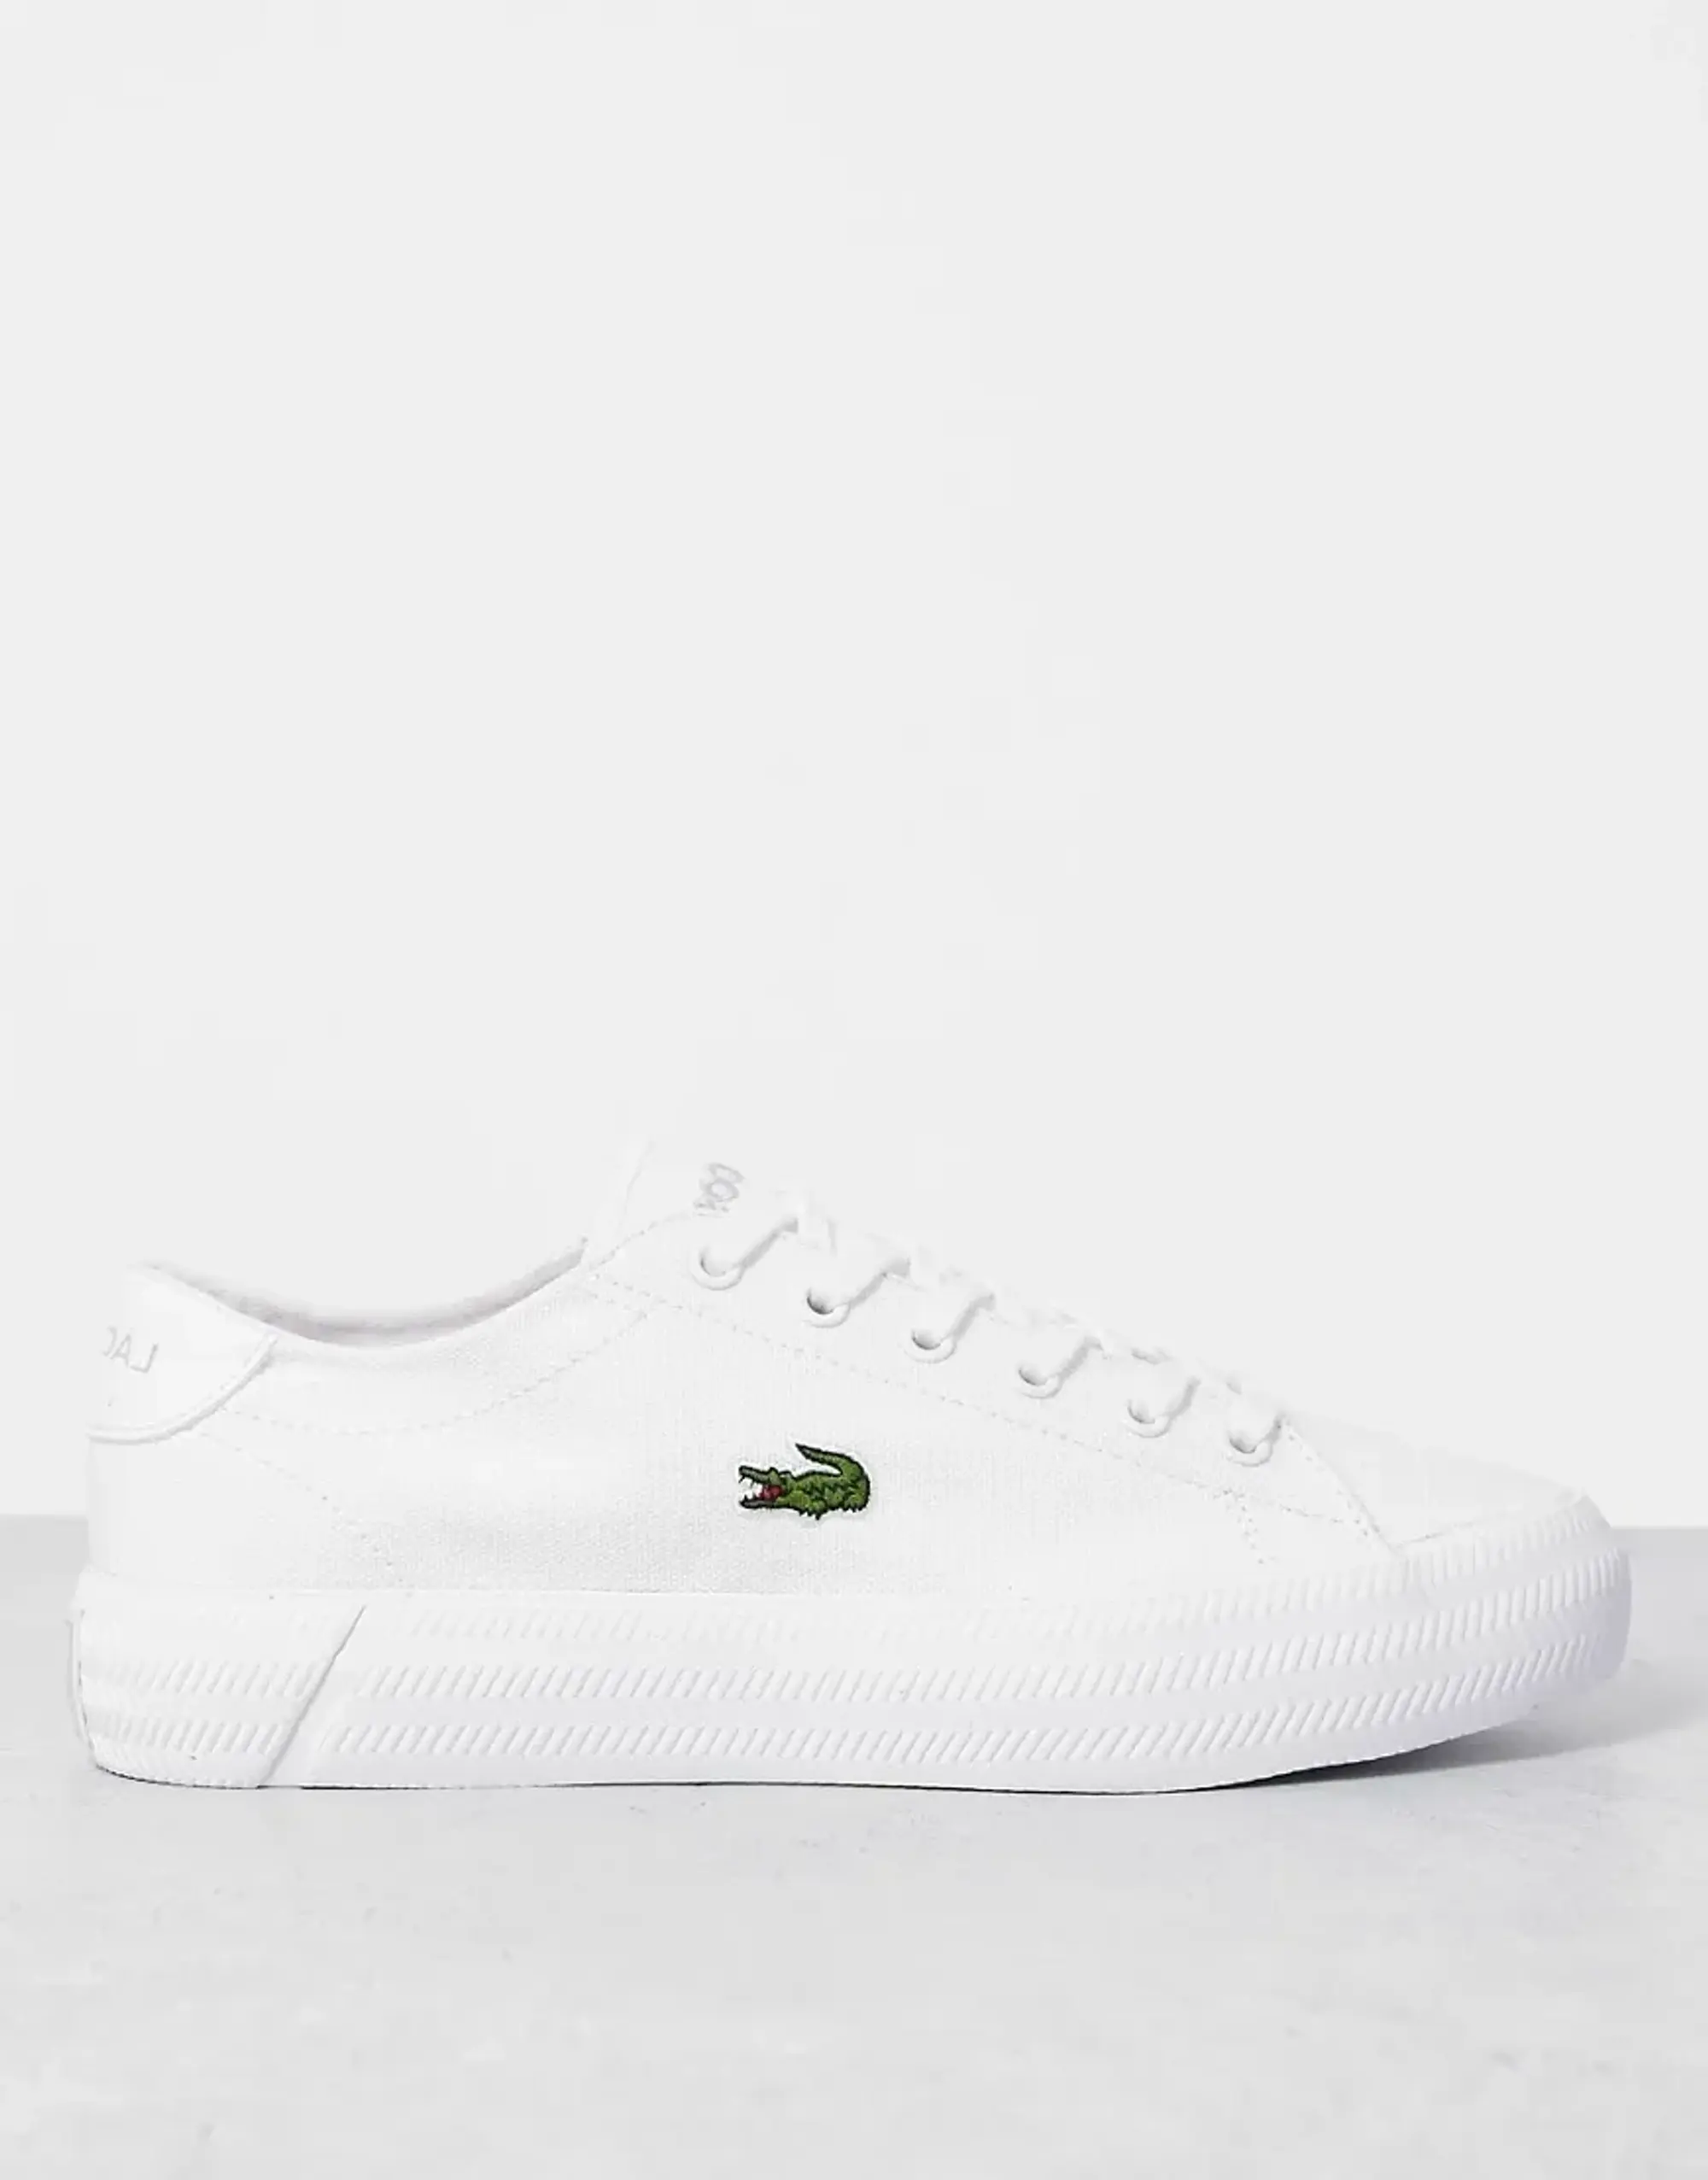 Lacoste Gripshot Flatform Trainers In White Canvas